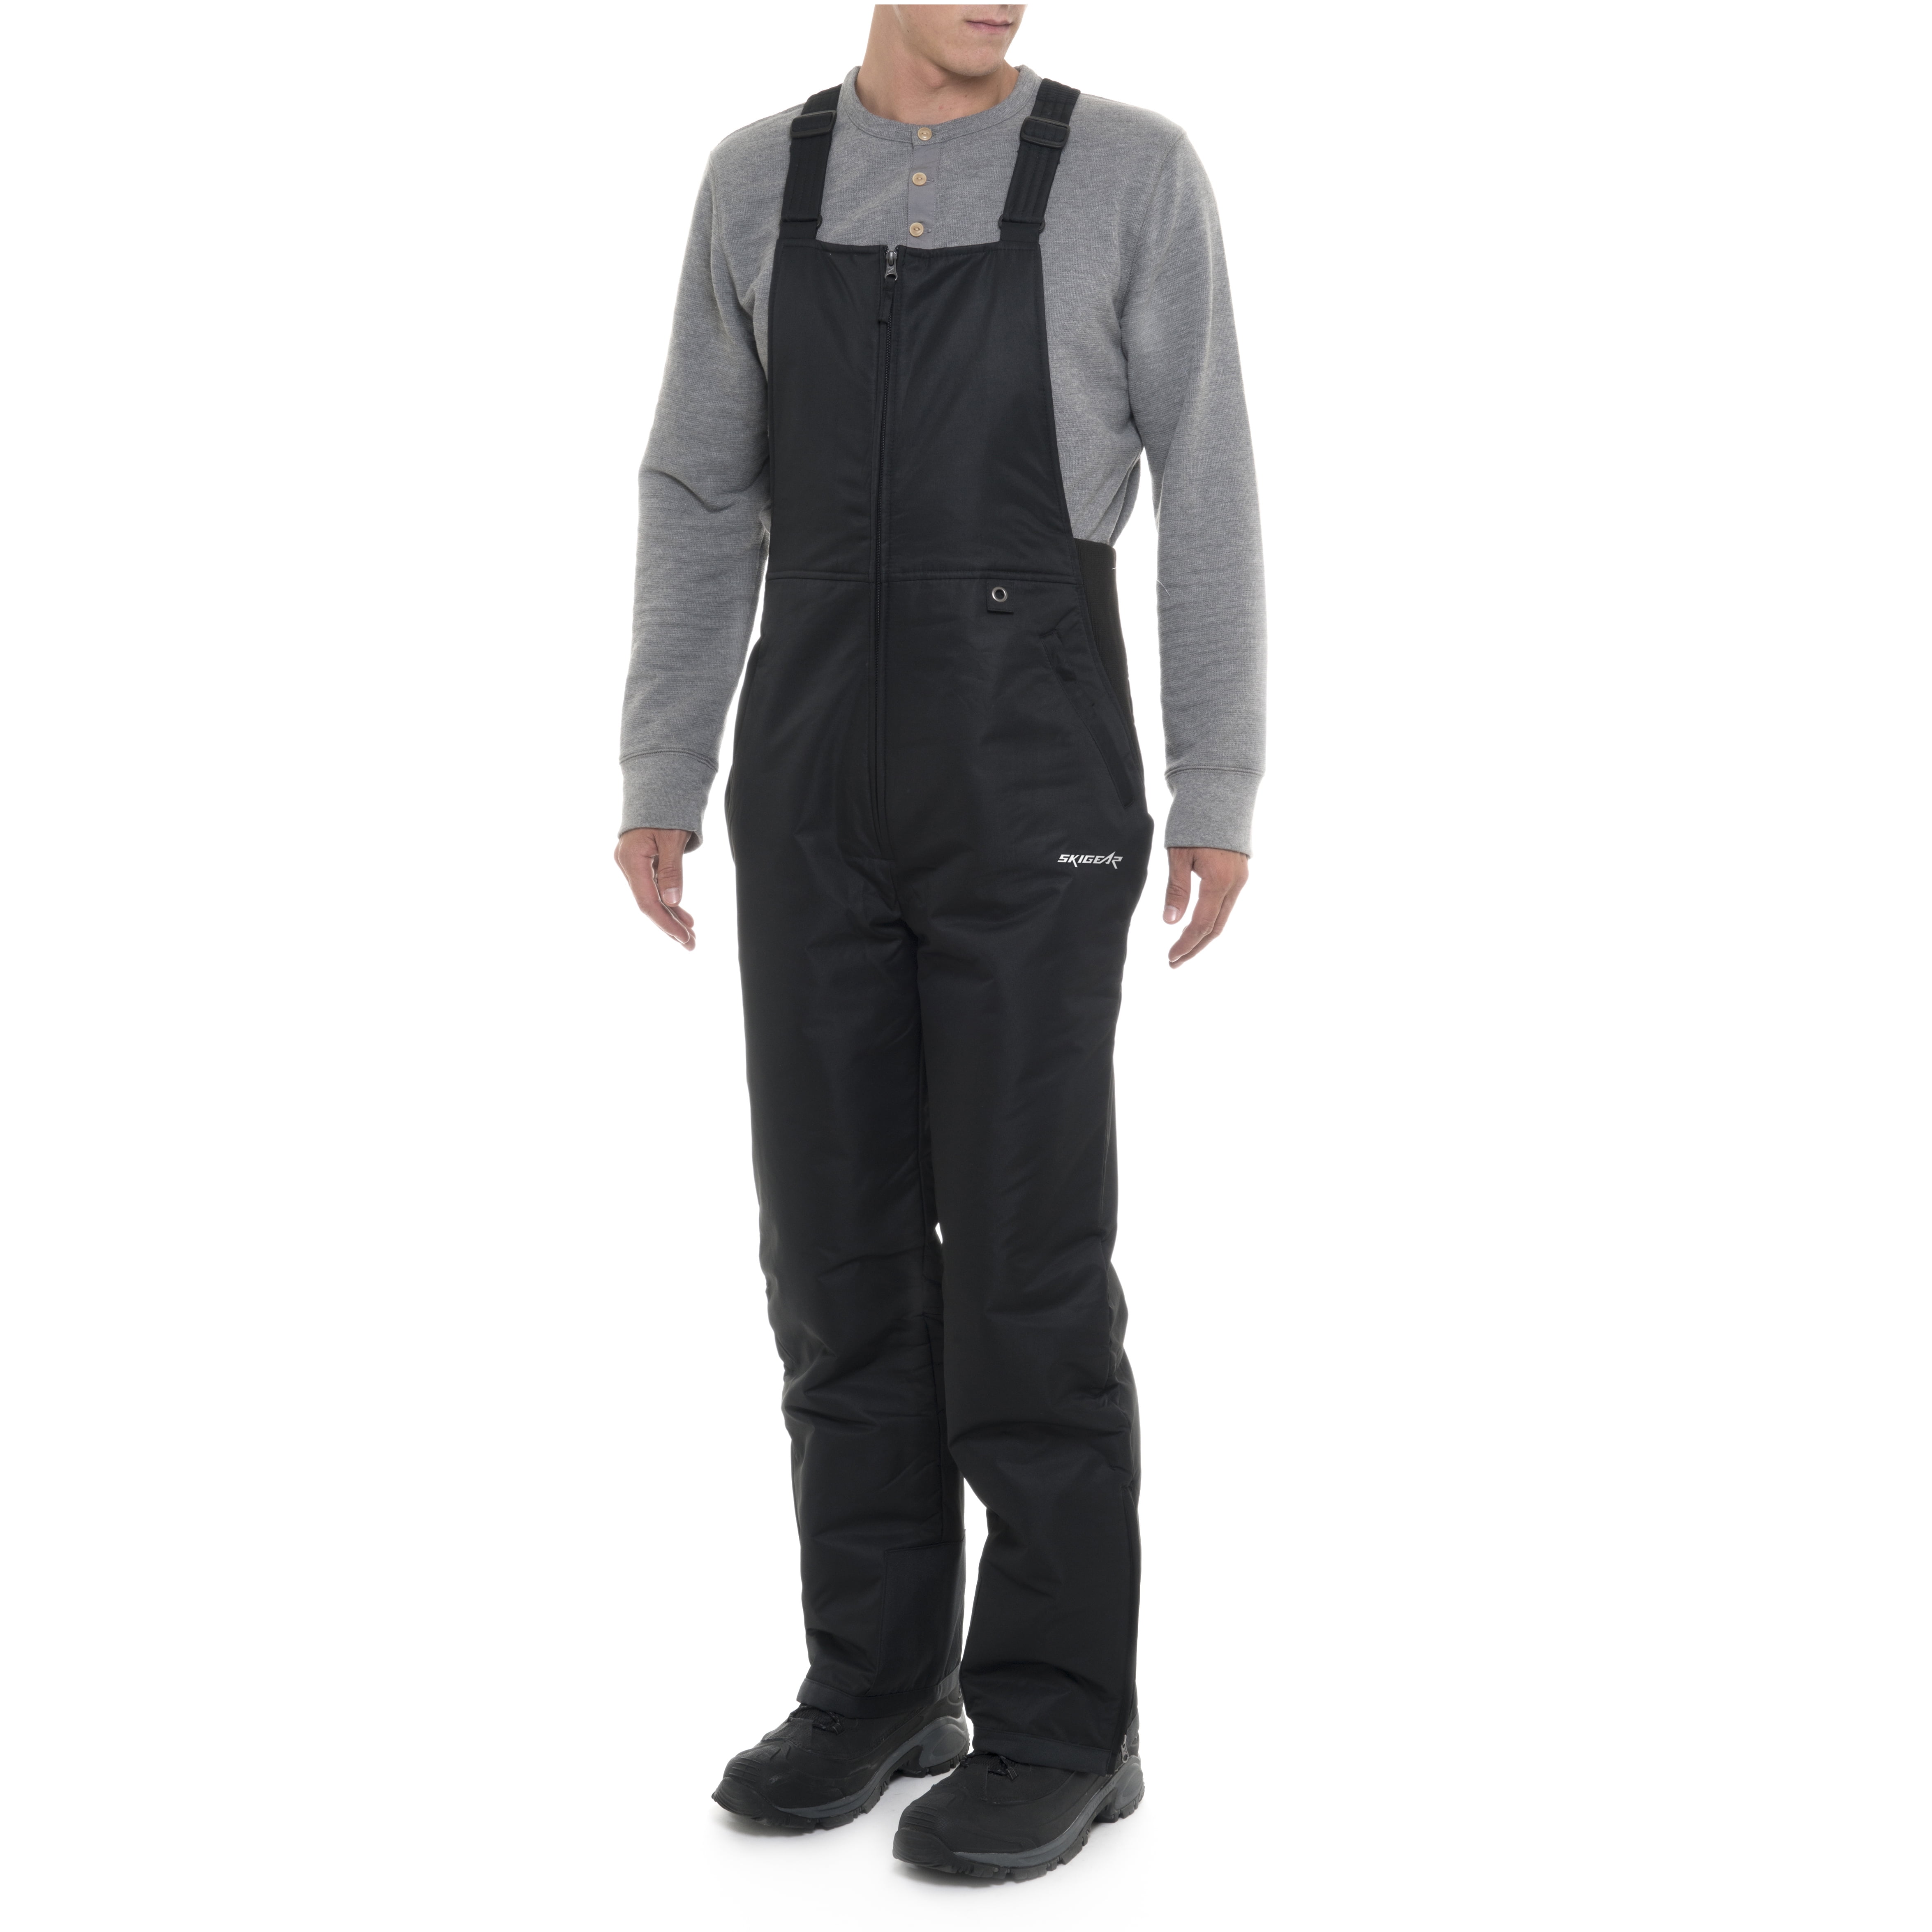 Skigear by Arctix Men's Essential Insulated Bib Overall, Size: XL